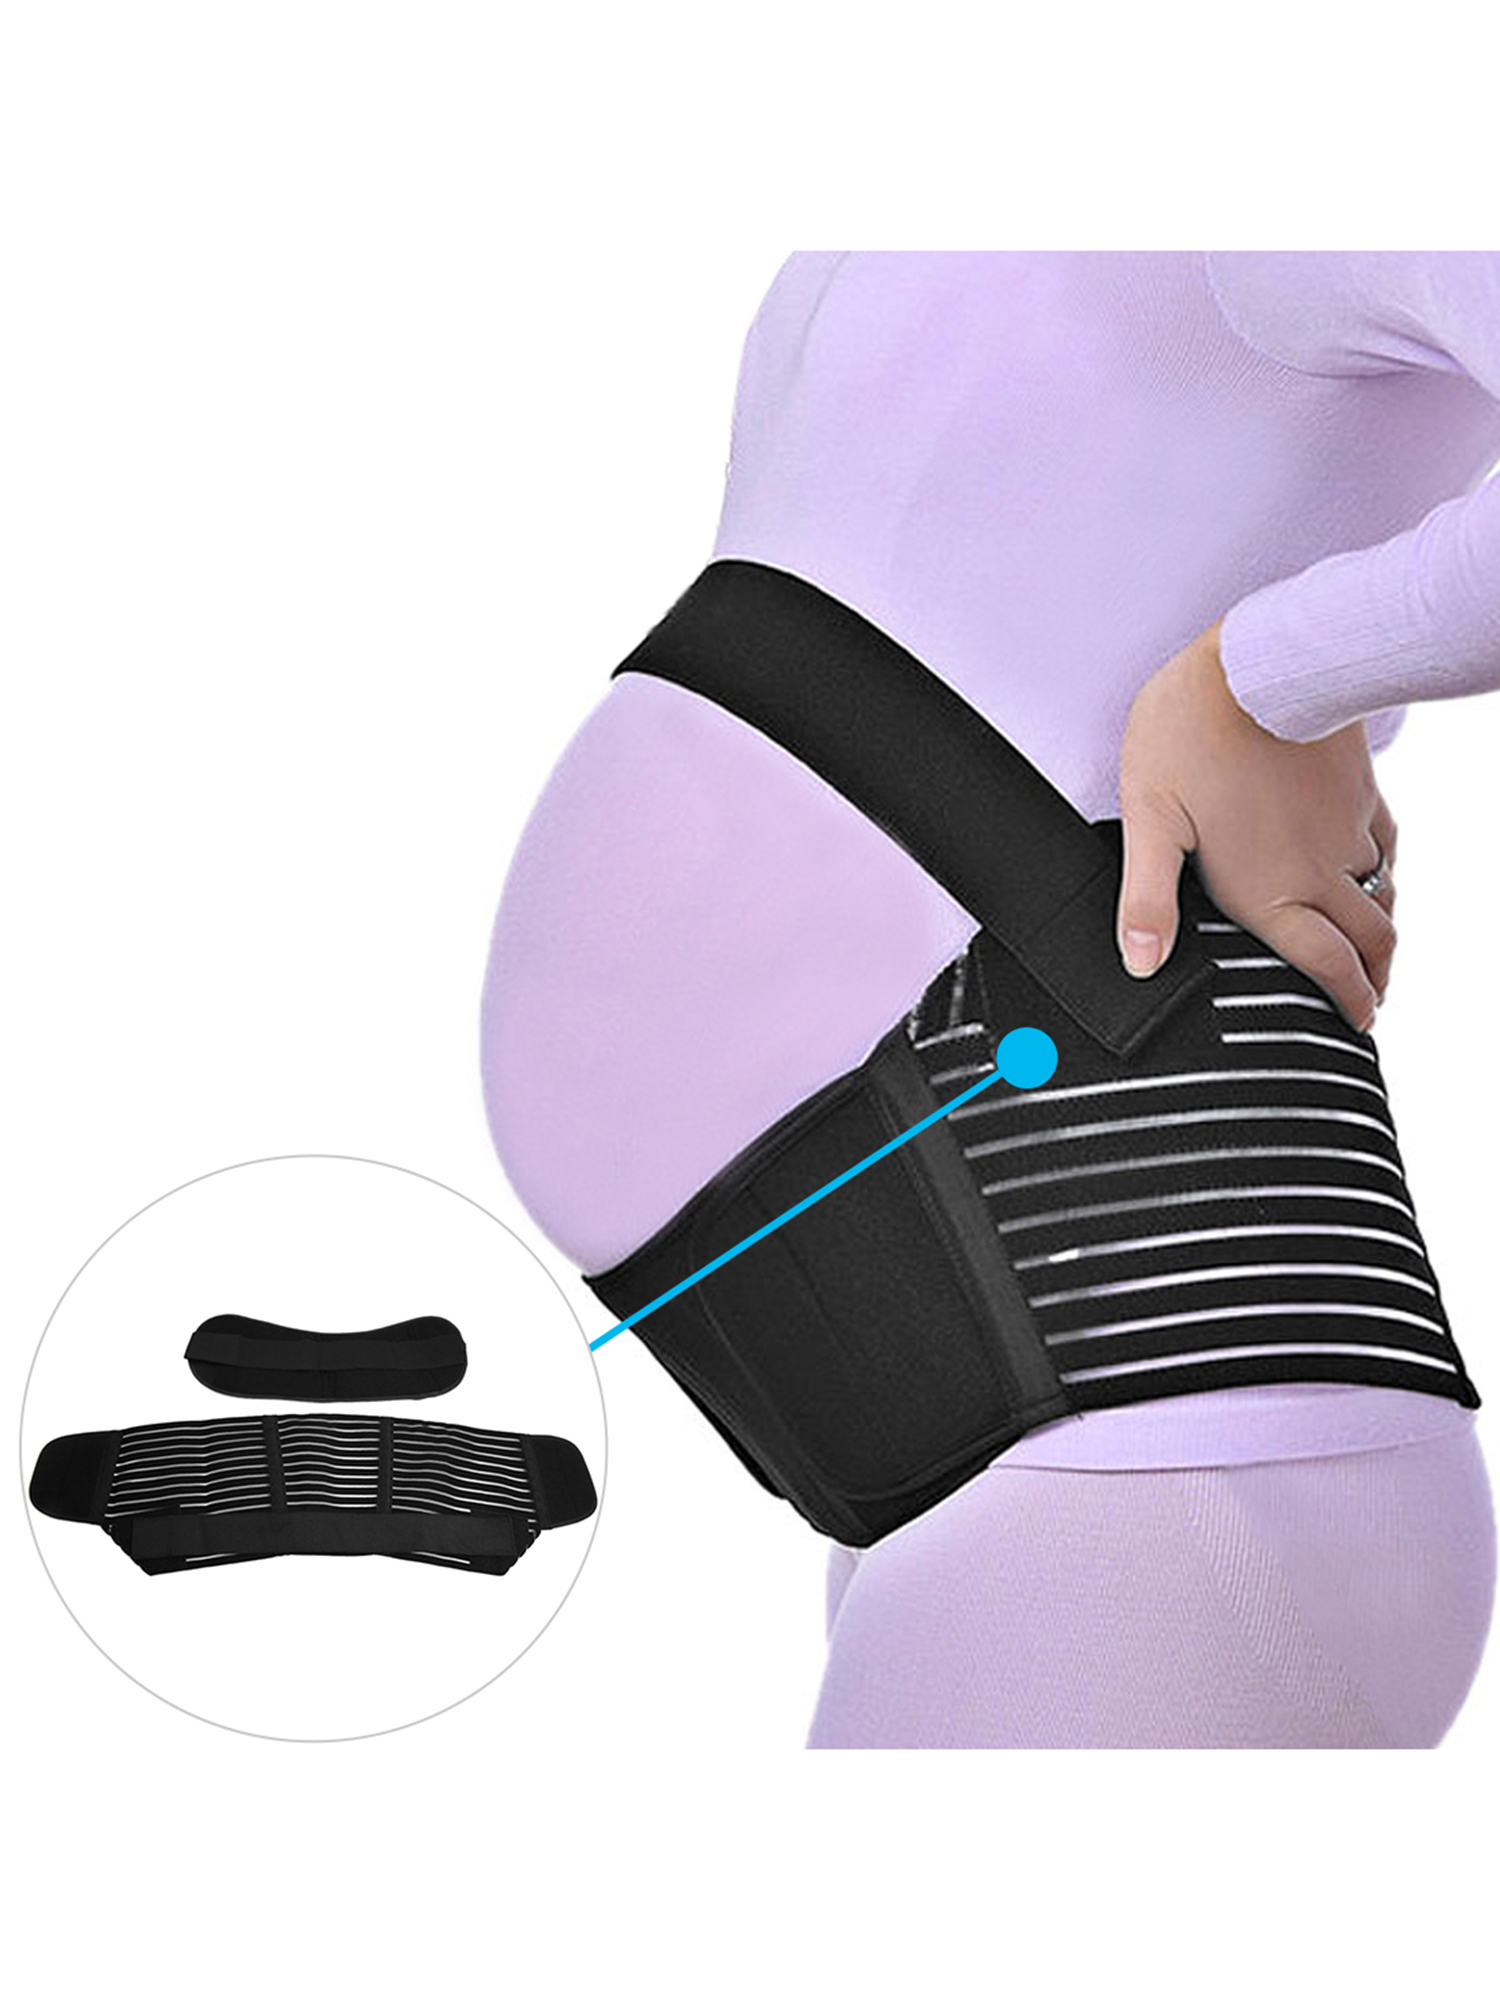 elastic maternity fashion. 3-pack jeans extension Mamaband pregnancy belly band for the baby ball in a double pack back warmer and shirt extension for pregnant women